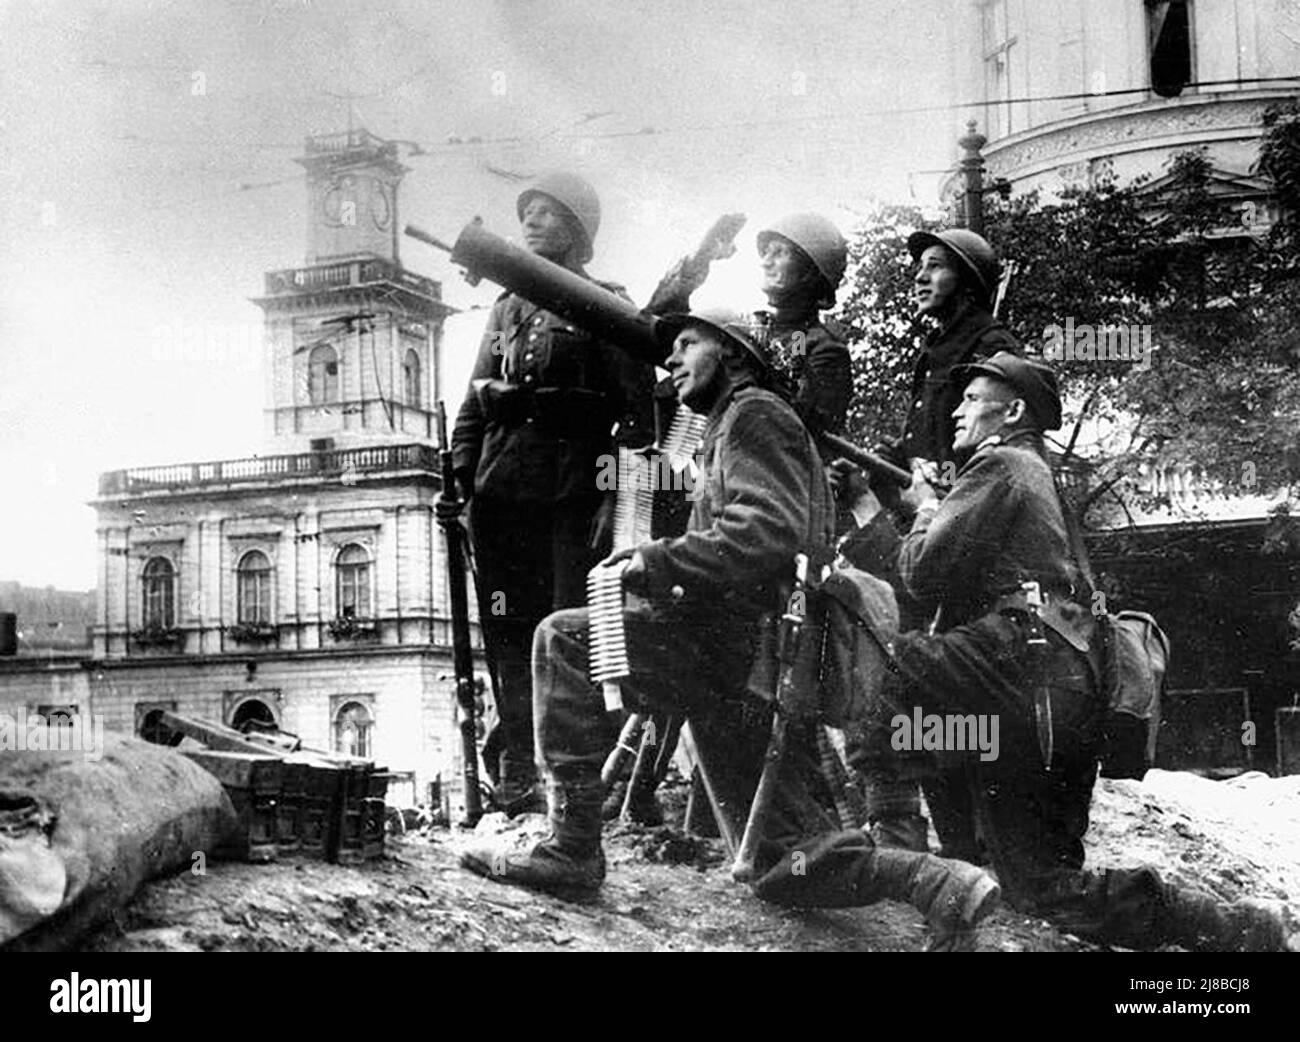 Polish soldiers with anti-aircraft artillery in the Invasion of Poland, World War II. Stock Photo